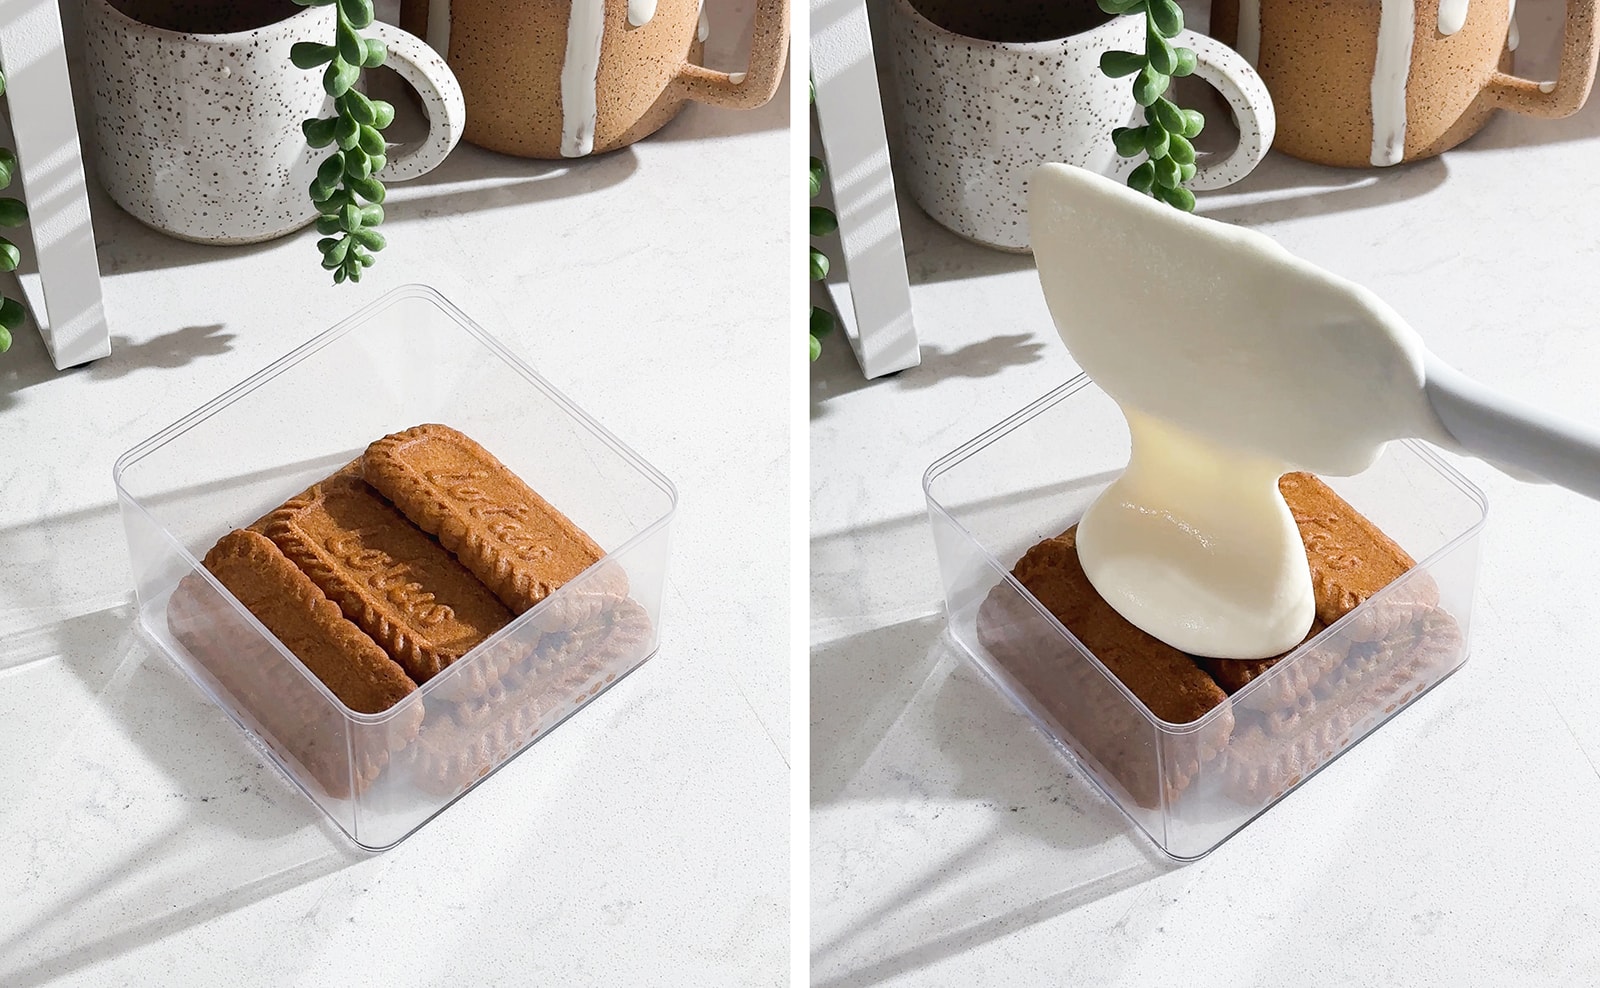 Left to right: Soaked biscoff biscuits lined up in clear box, dropping mascarpone cream on top of biscuits from a spatula.